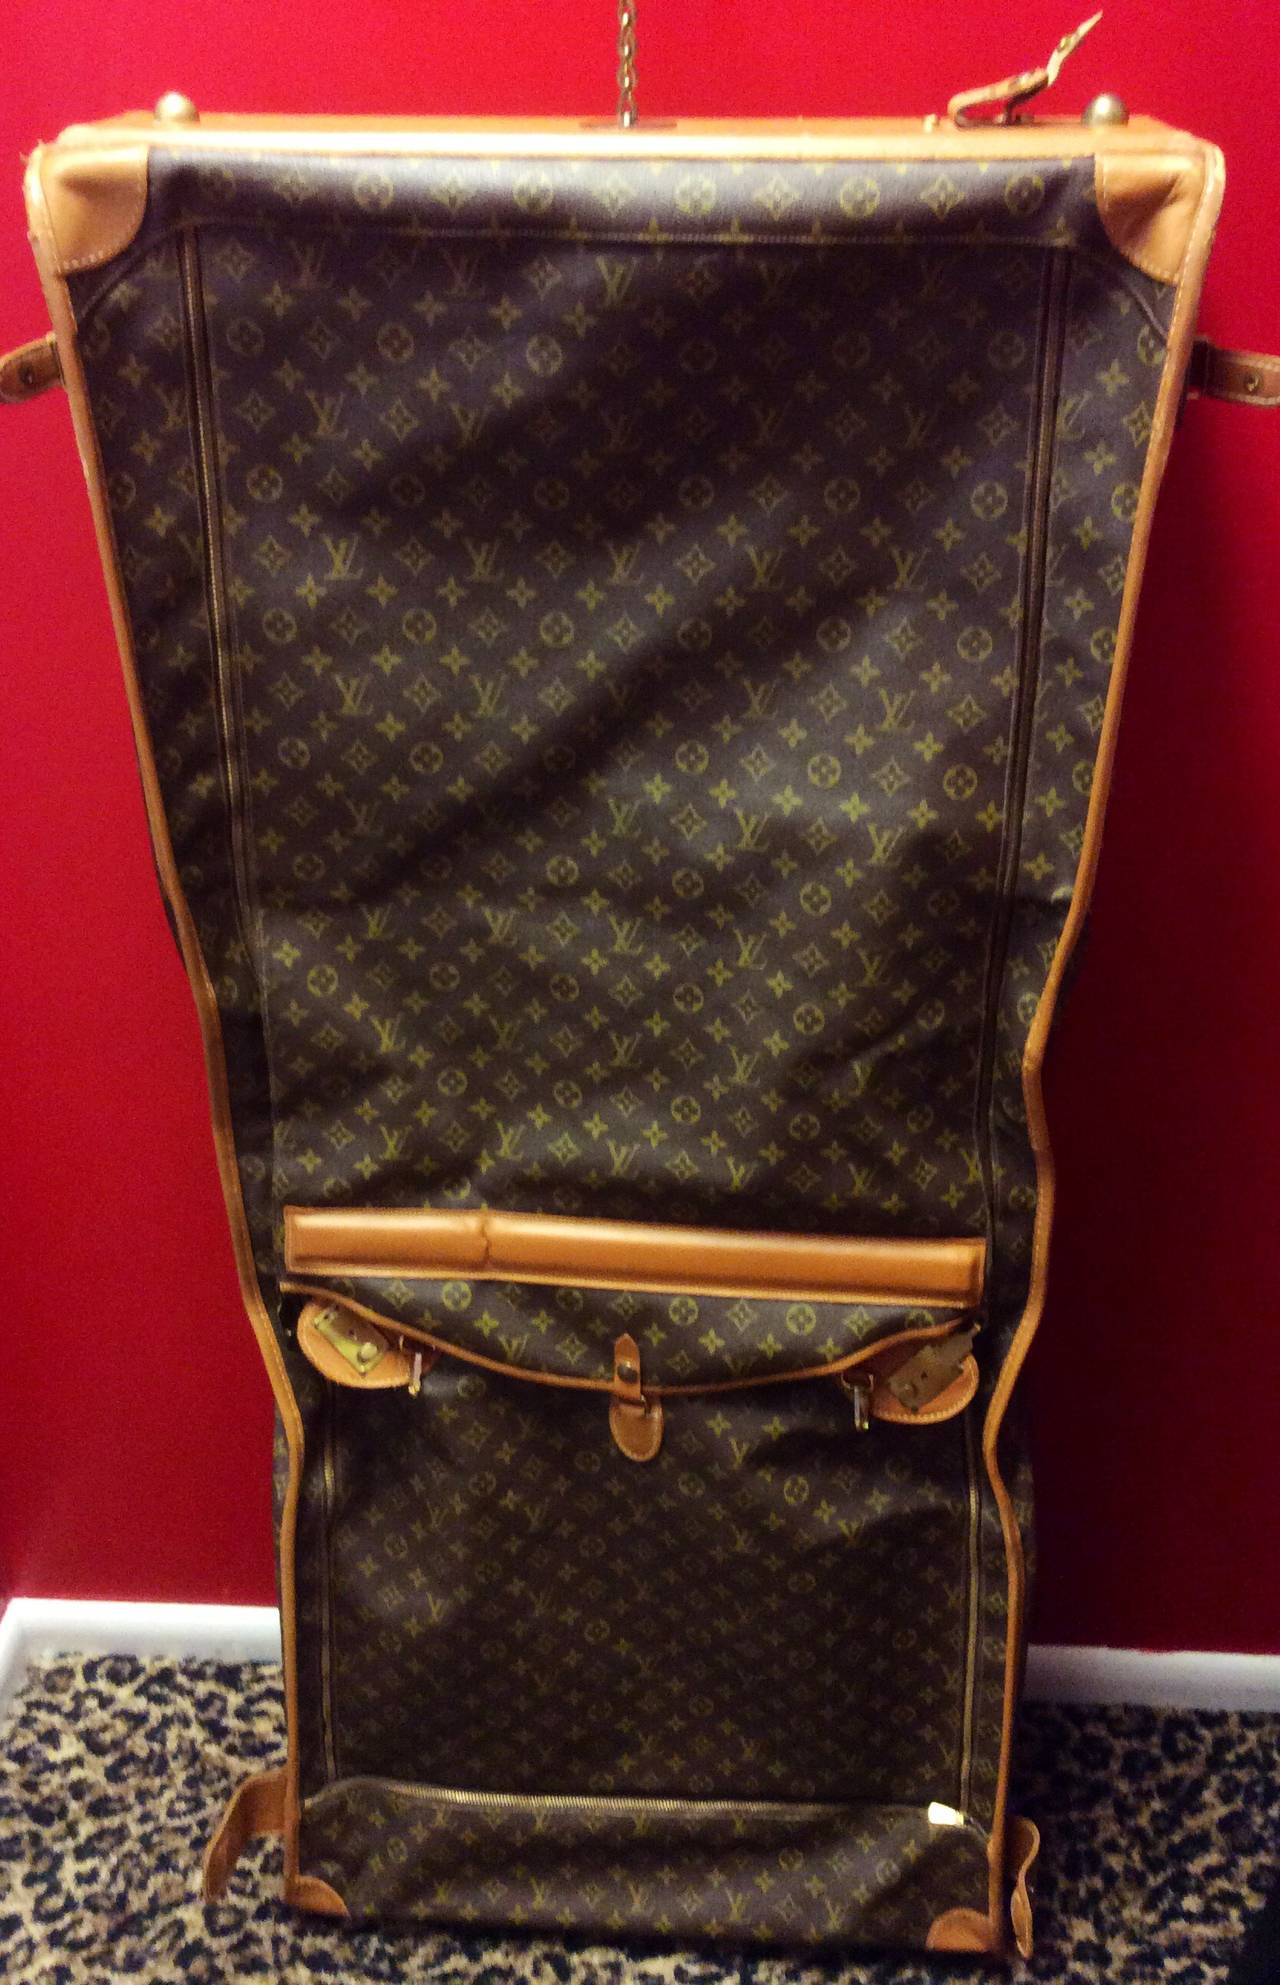 This is a vintage Louis Vuitton French Company for Saks Fifth Avenue monogram large garment bag
Zip shoe compartment. 
Measurements: approximately
51